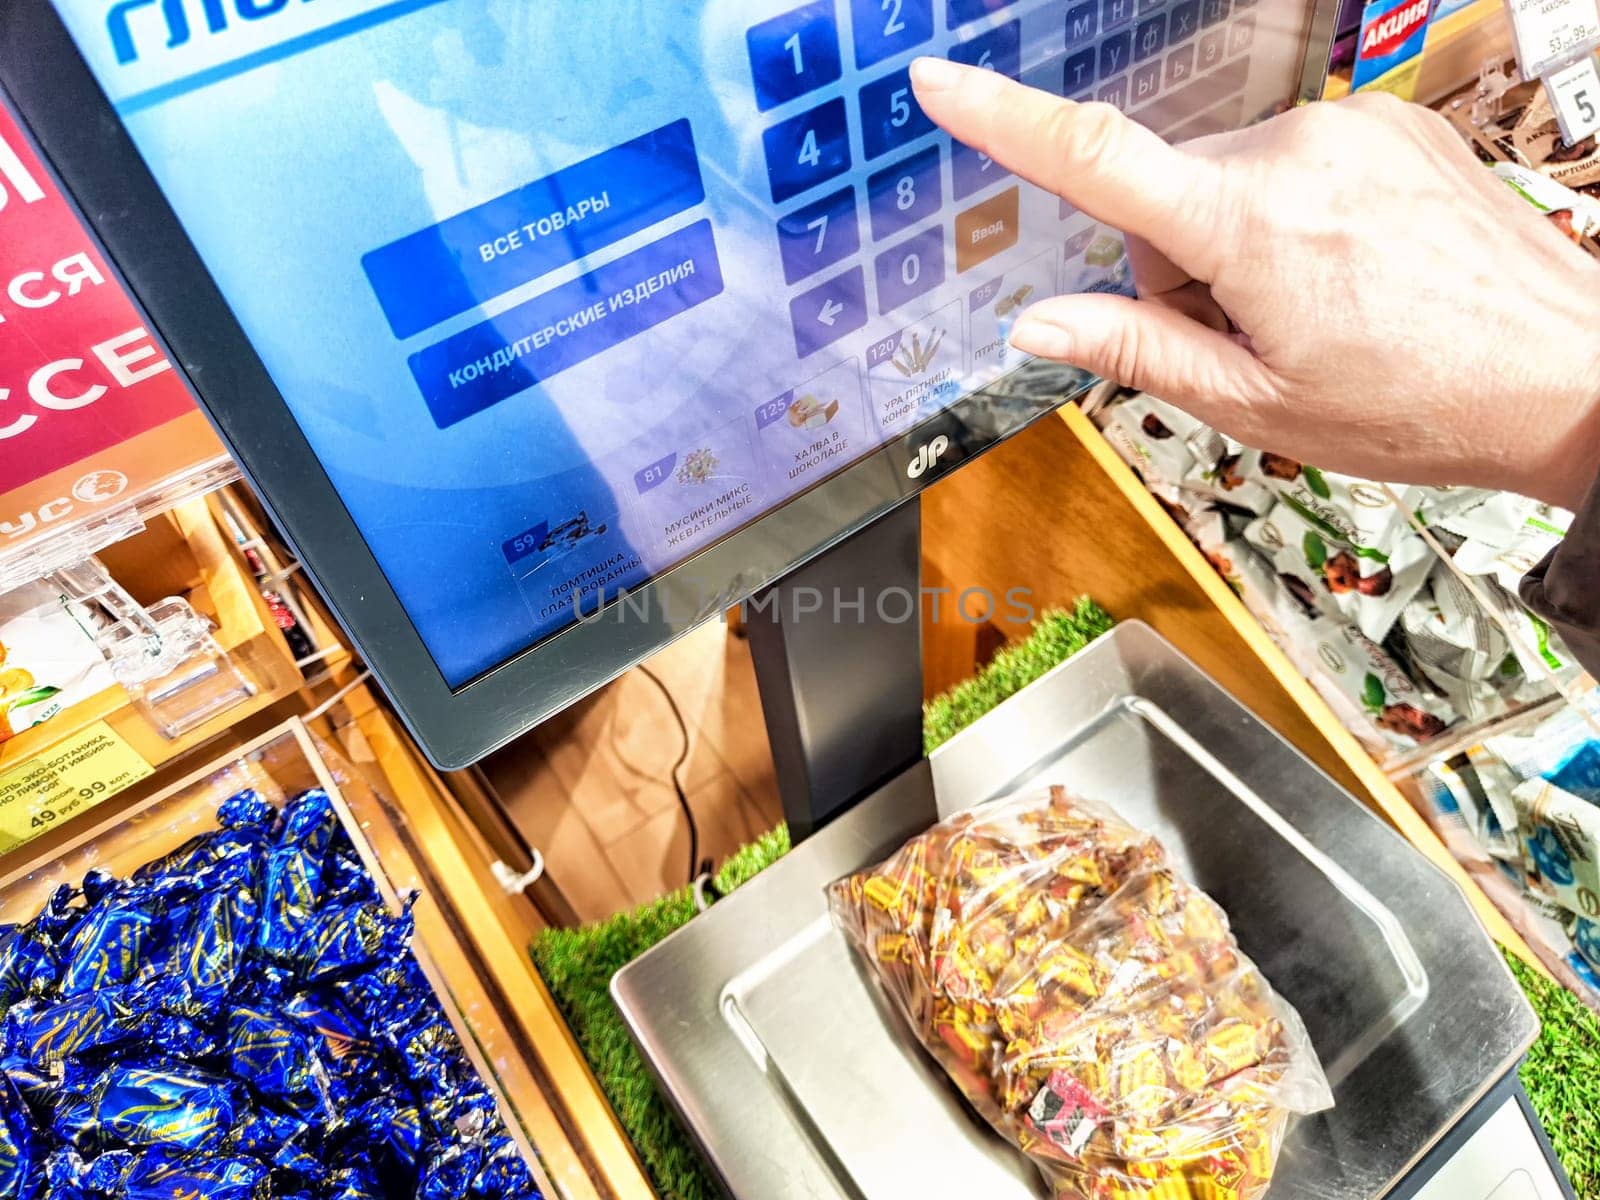 Kirov, Russia - April 17, 2024: Customer Weighing Produce on Digital Scales at Grocery Store. A person is using a touchscreen to weigh items at store